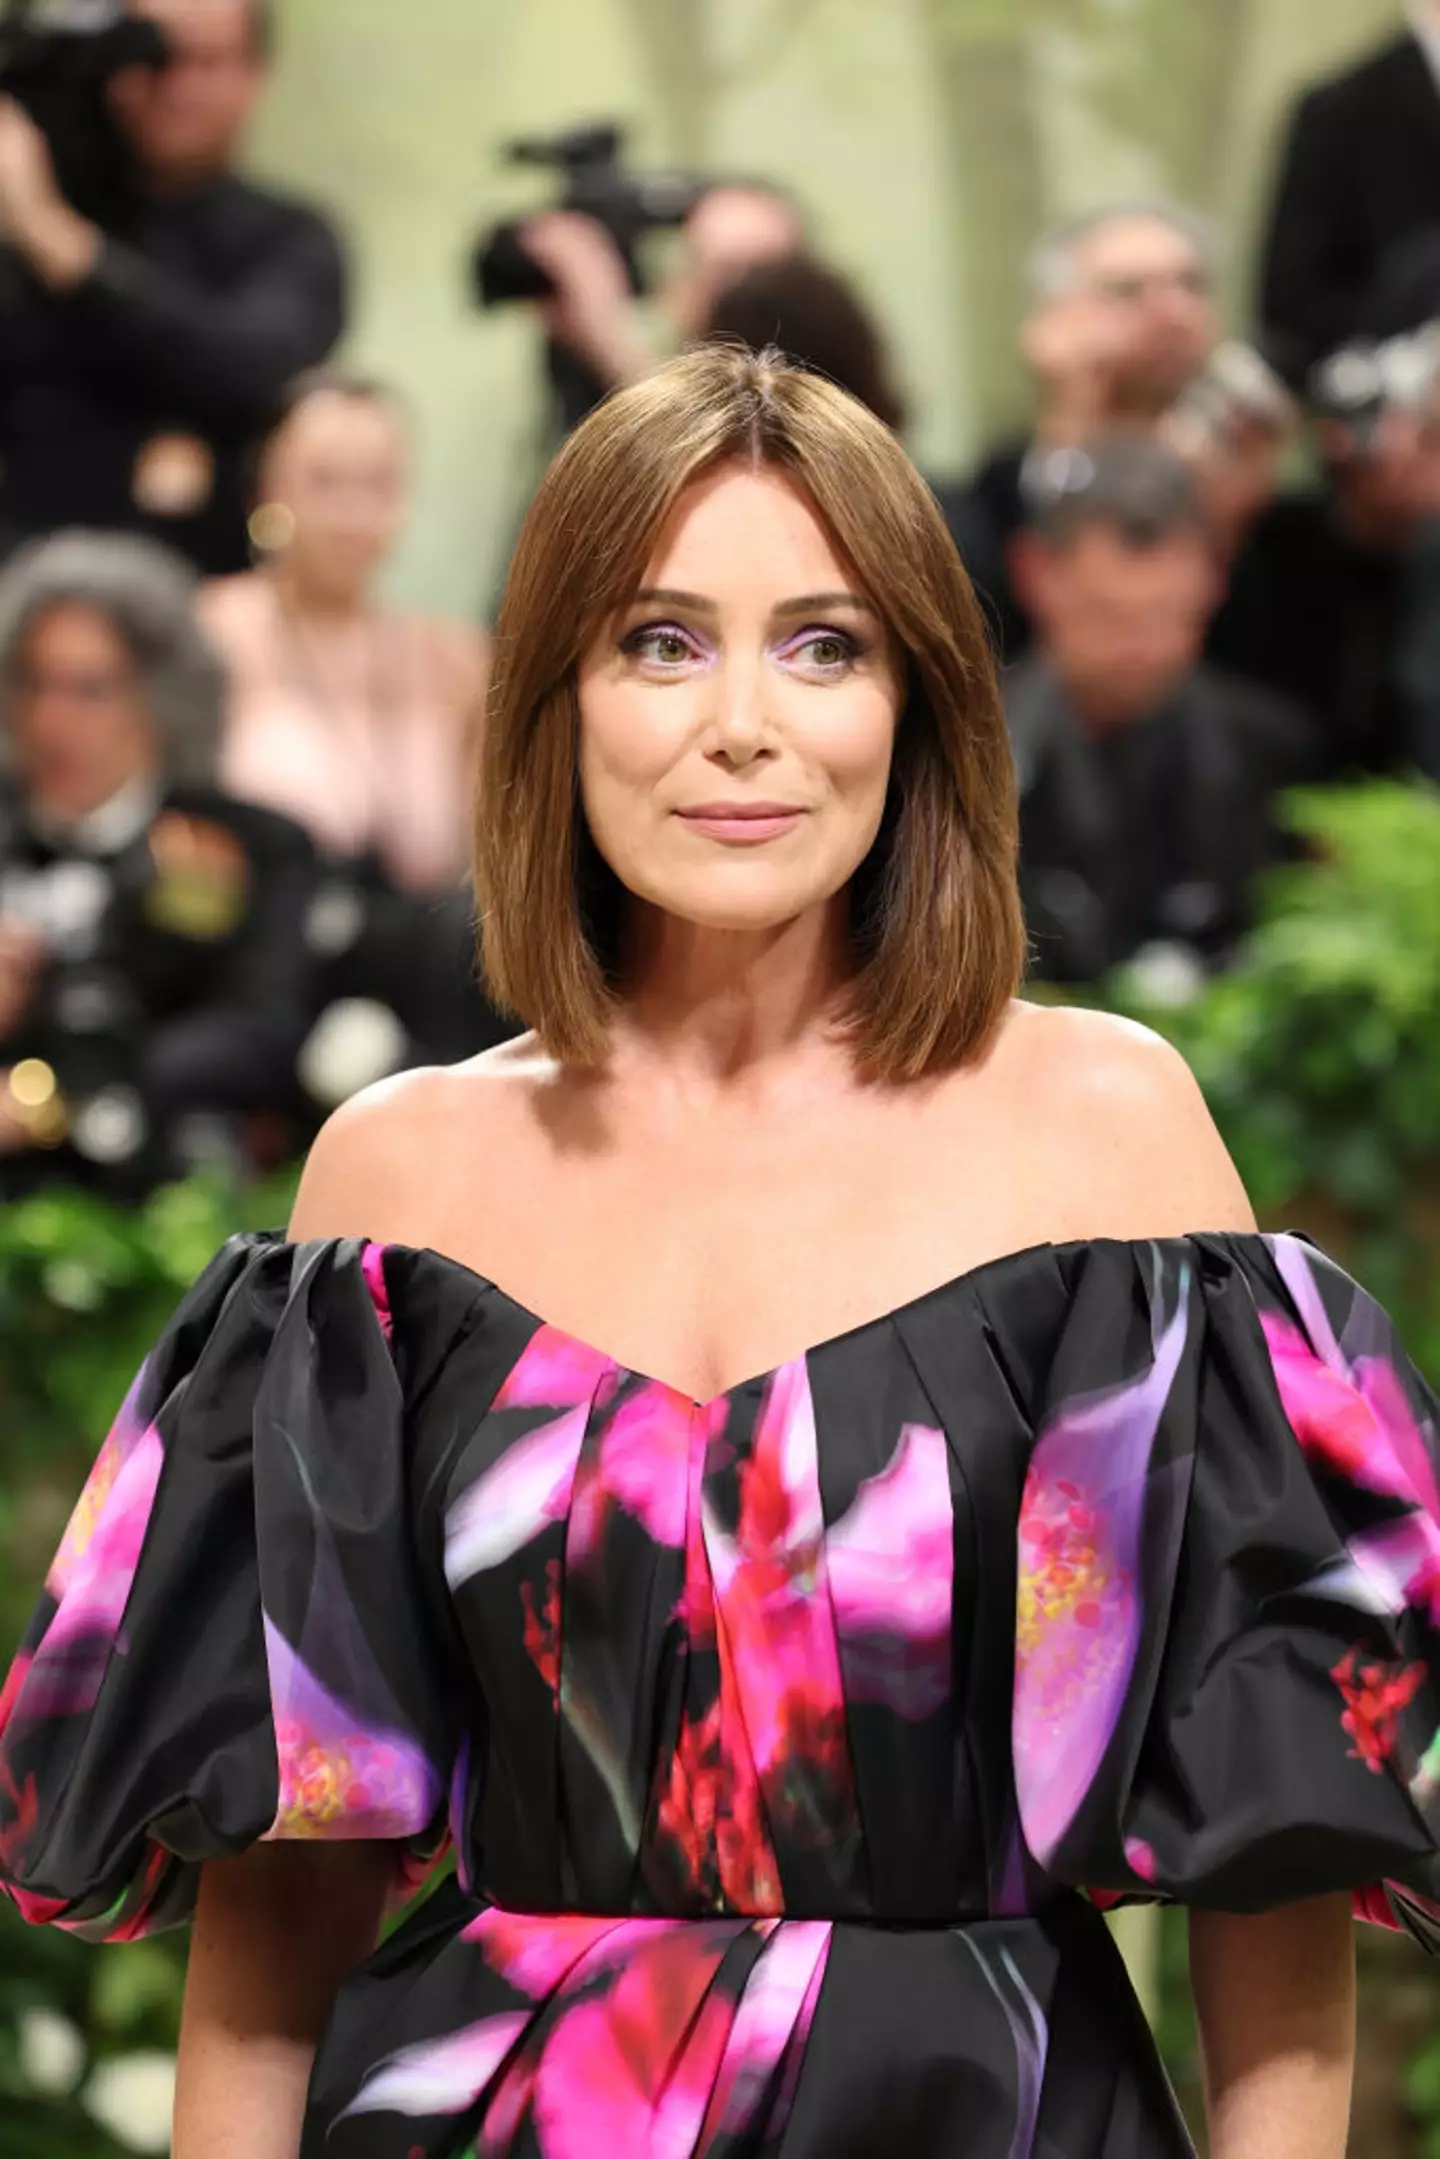 Fans were confused but delighted to see Keeley Hawes on the Met Gala red carpet. (Aliah Anderson/Getty Images)